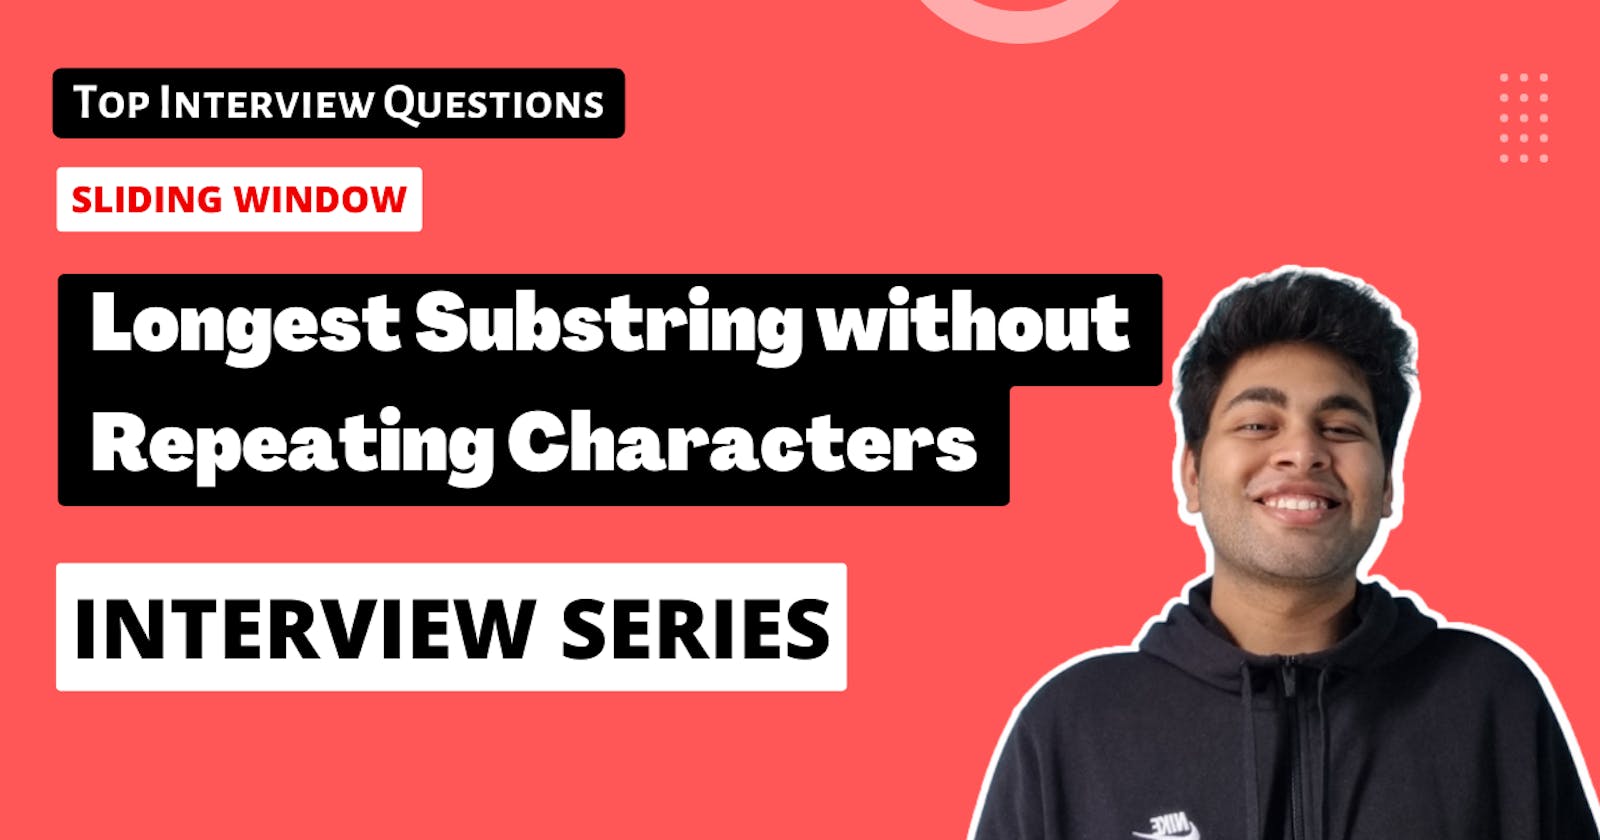 Length of longest substring without repeating characters